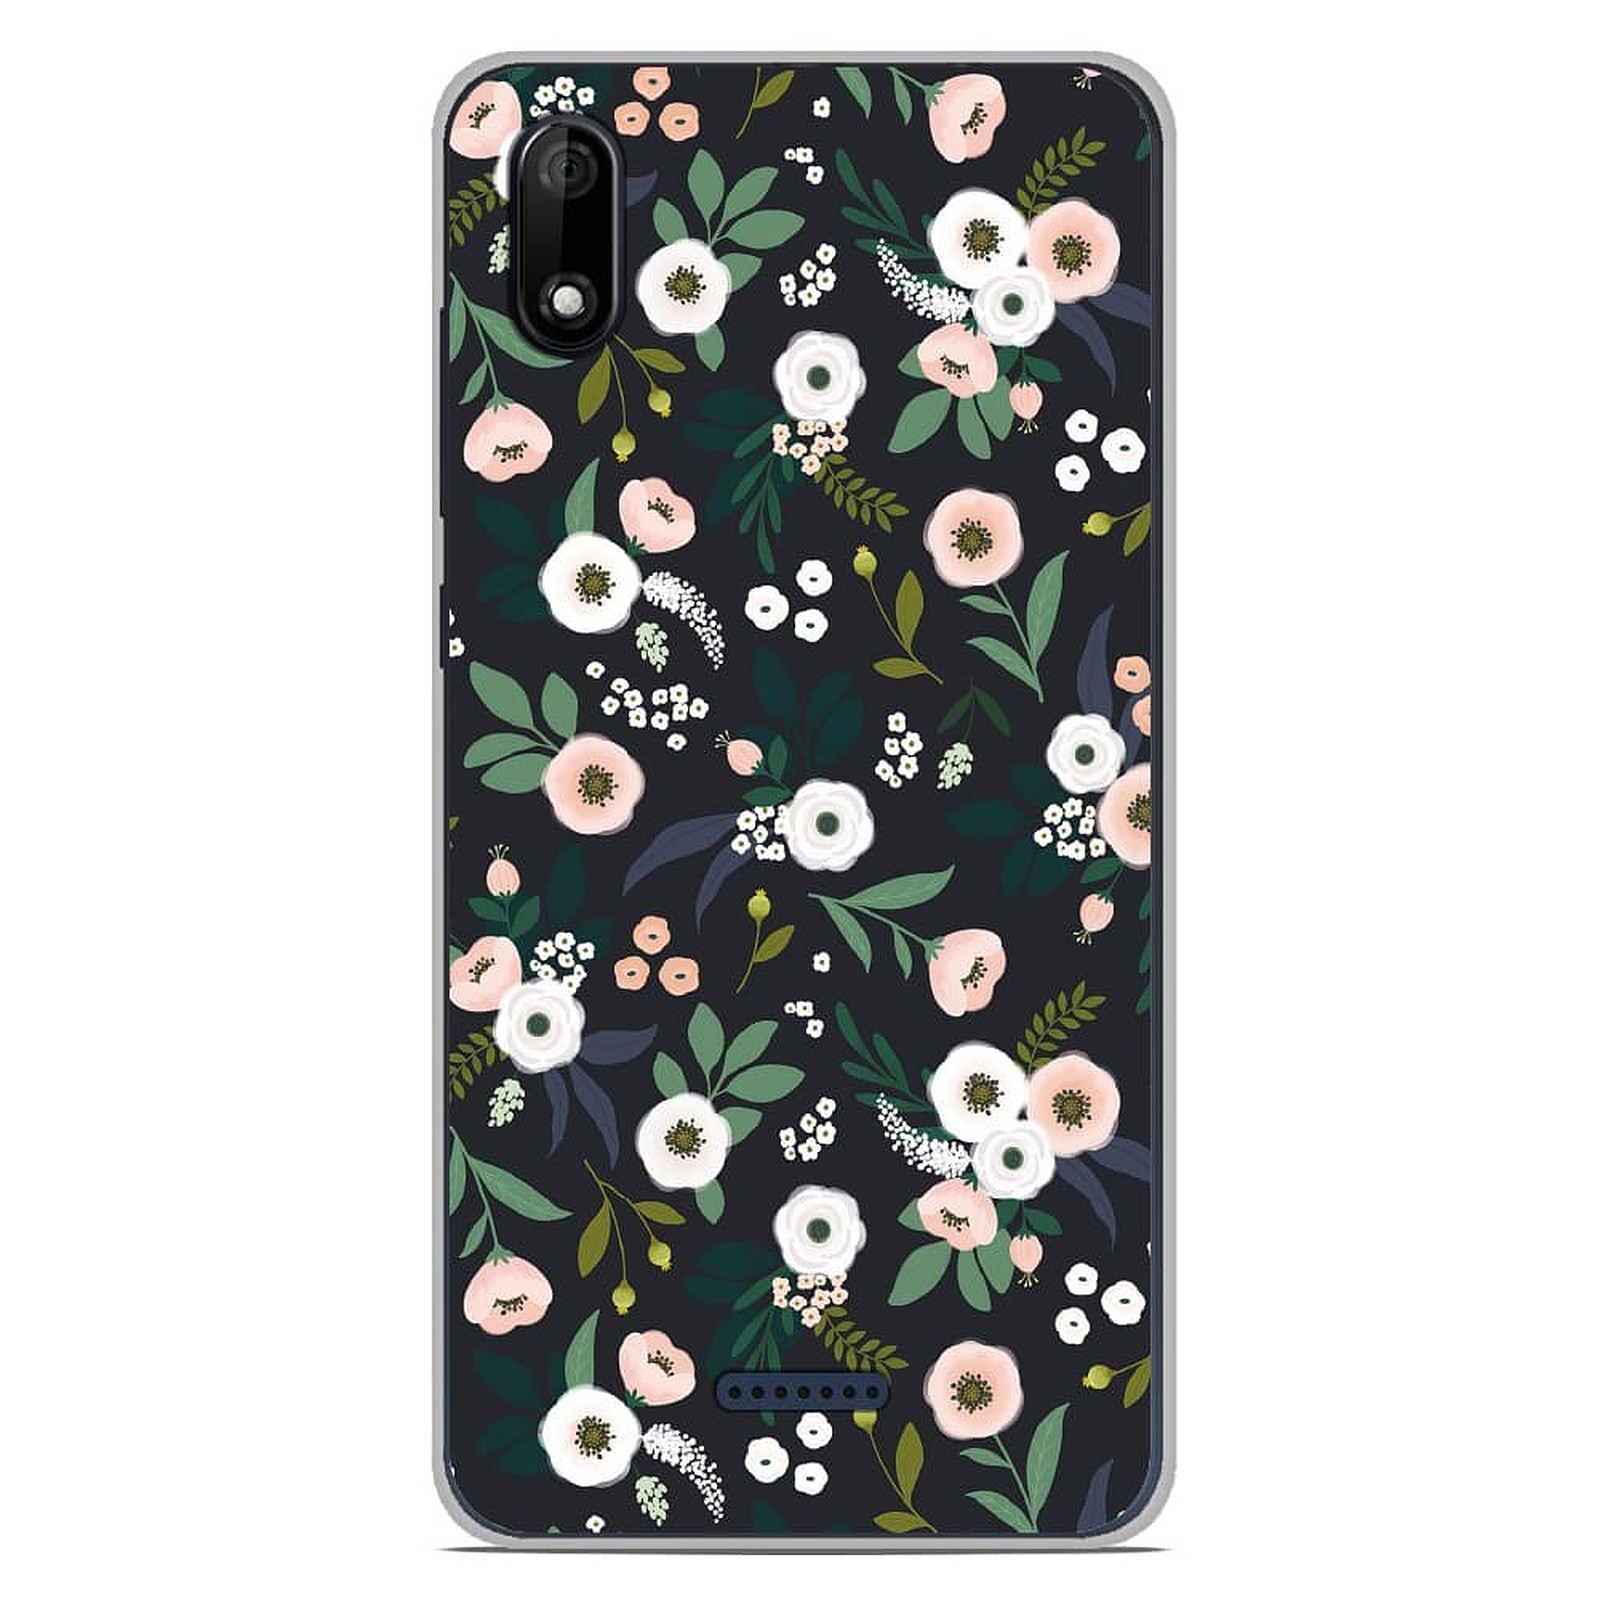 1001 Coques Coque silicone gel Wiko Y60 motif Flowers Noir - Coque telephone 1001Coques